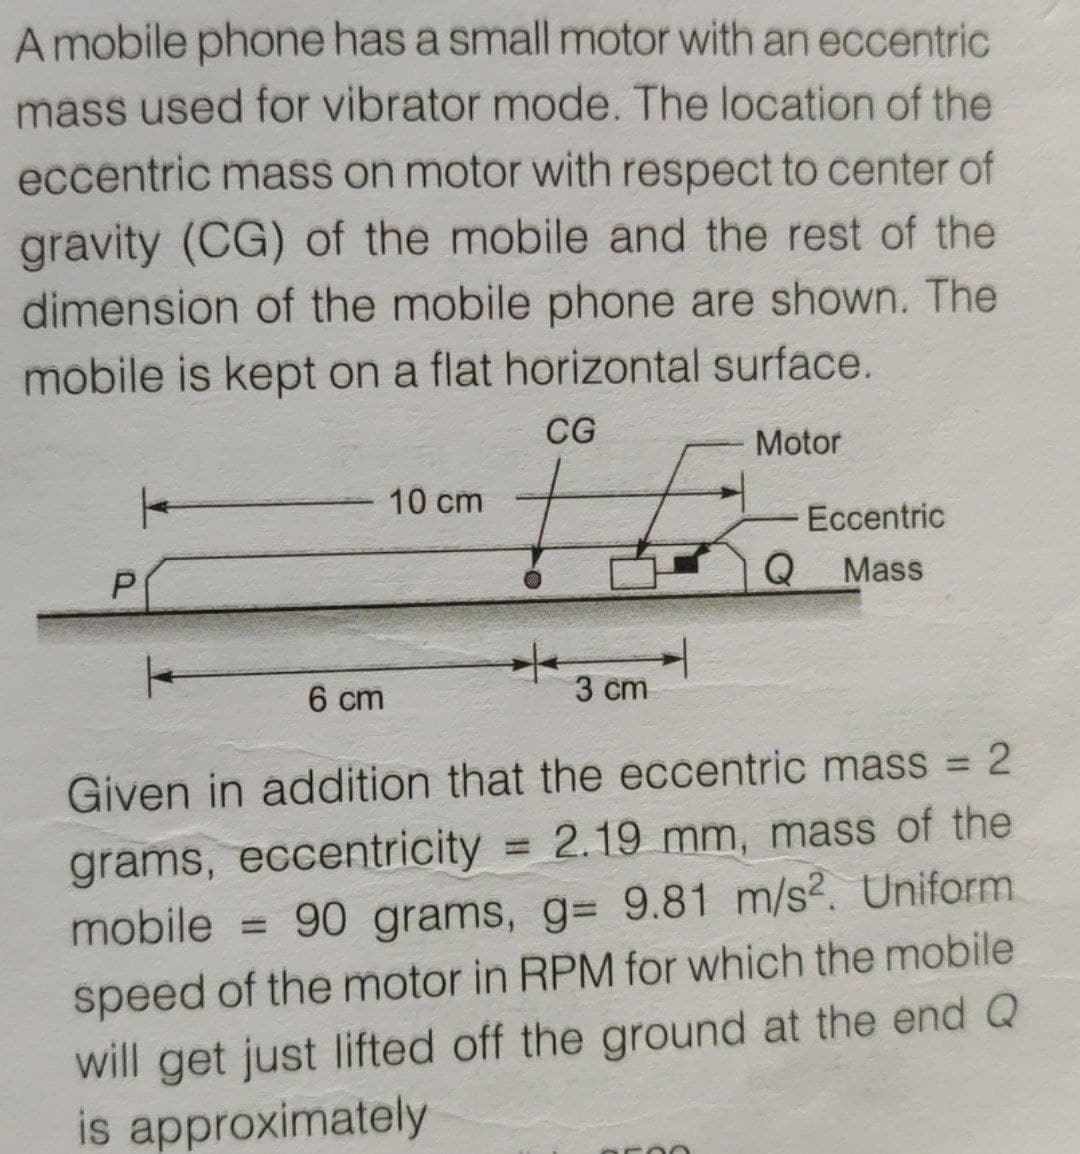 A mobile phone has a small motor with an eccentric
mass used for vibrator mode. The location of the
eccentric mass on motor with respect to center of
gravity (CG) of the mobile and the rest of the
dimension of the mobile phone are shown. The
mobile is kept on a flat horizontal surface.
CG
Motor
10 cm
Eccentric
Q
Mass
/-
3 cm
6 cm
Given in addition that the eccentric mass 2
%3D
grams, eccentricity = 2.19 mm, mass of the
mobile = 90 grams, g= 9.81 m/s2. Uniform
%3D
%3D
speed of the motor in RPM for which the mobile
will get just lifted off the ground at the end Q
is approximately
